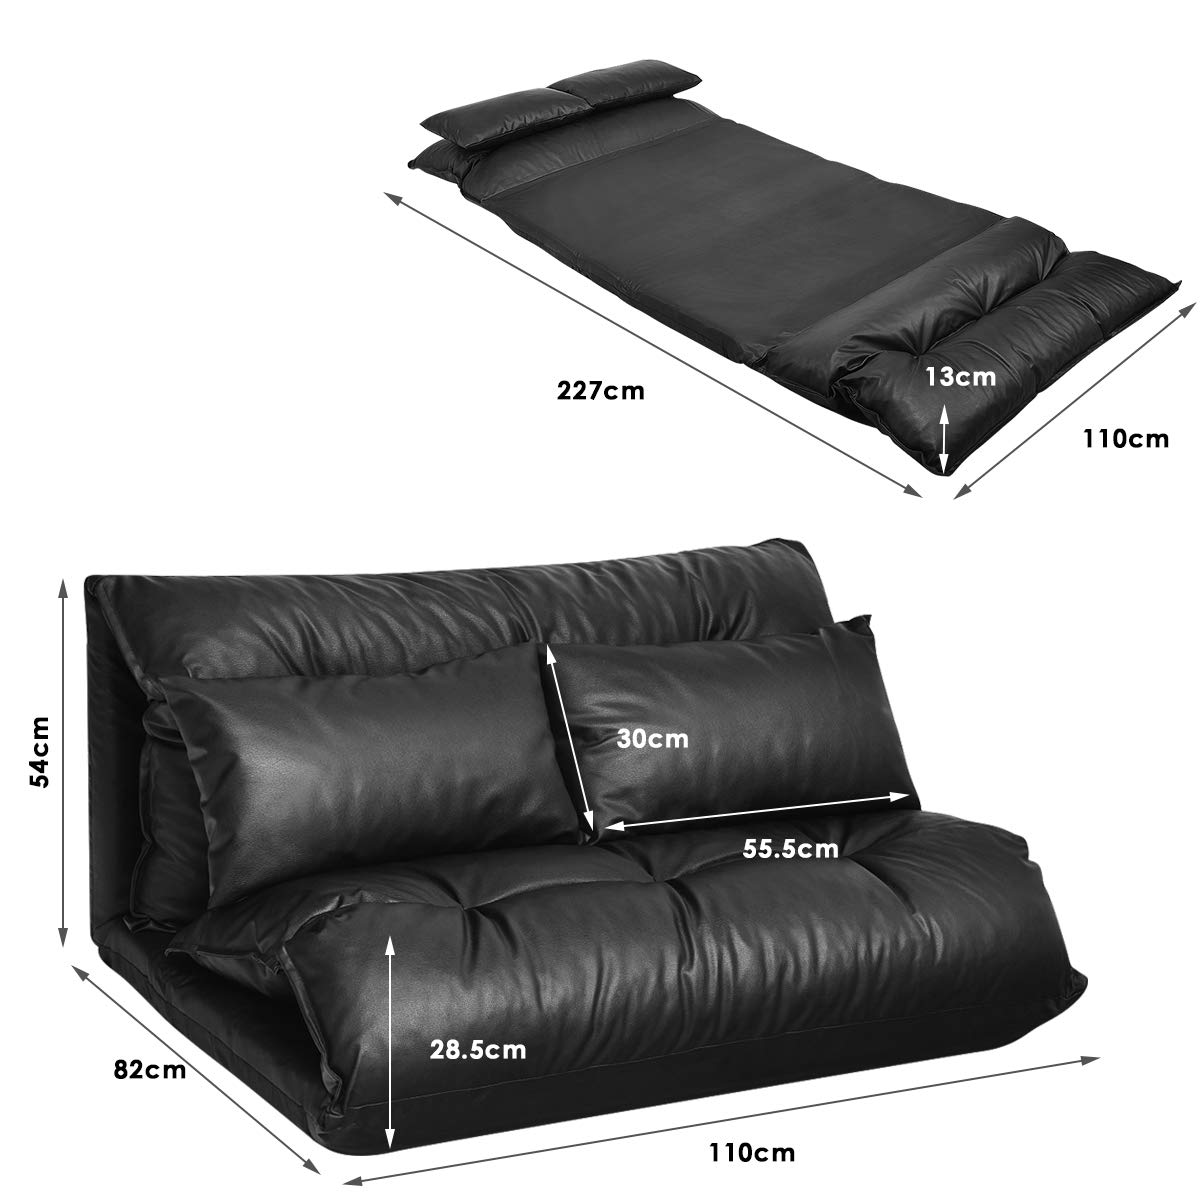 Adjustable Lounge Sofa Bed, 5 Adjustable Positions, 2 Pillows, PU Leather